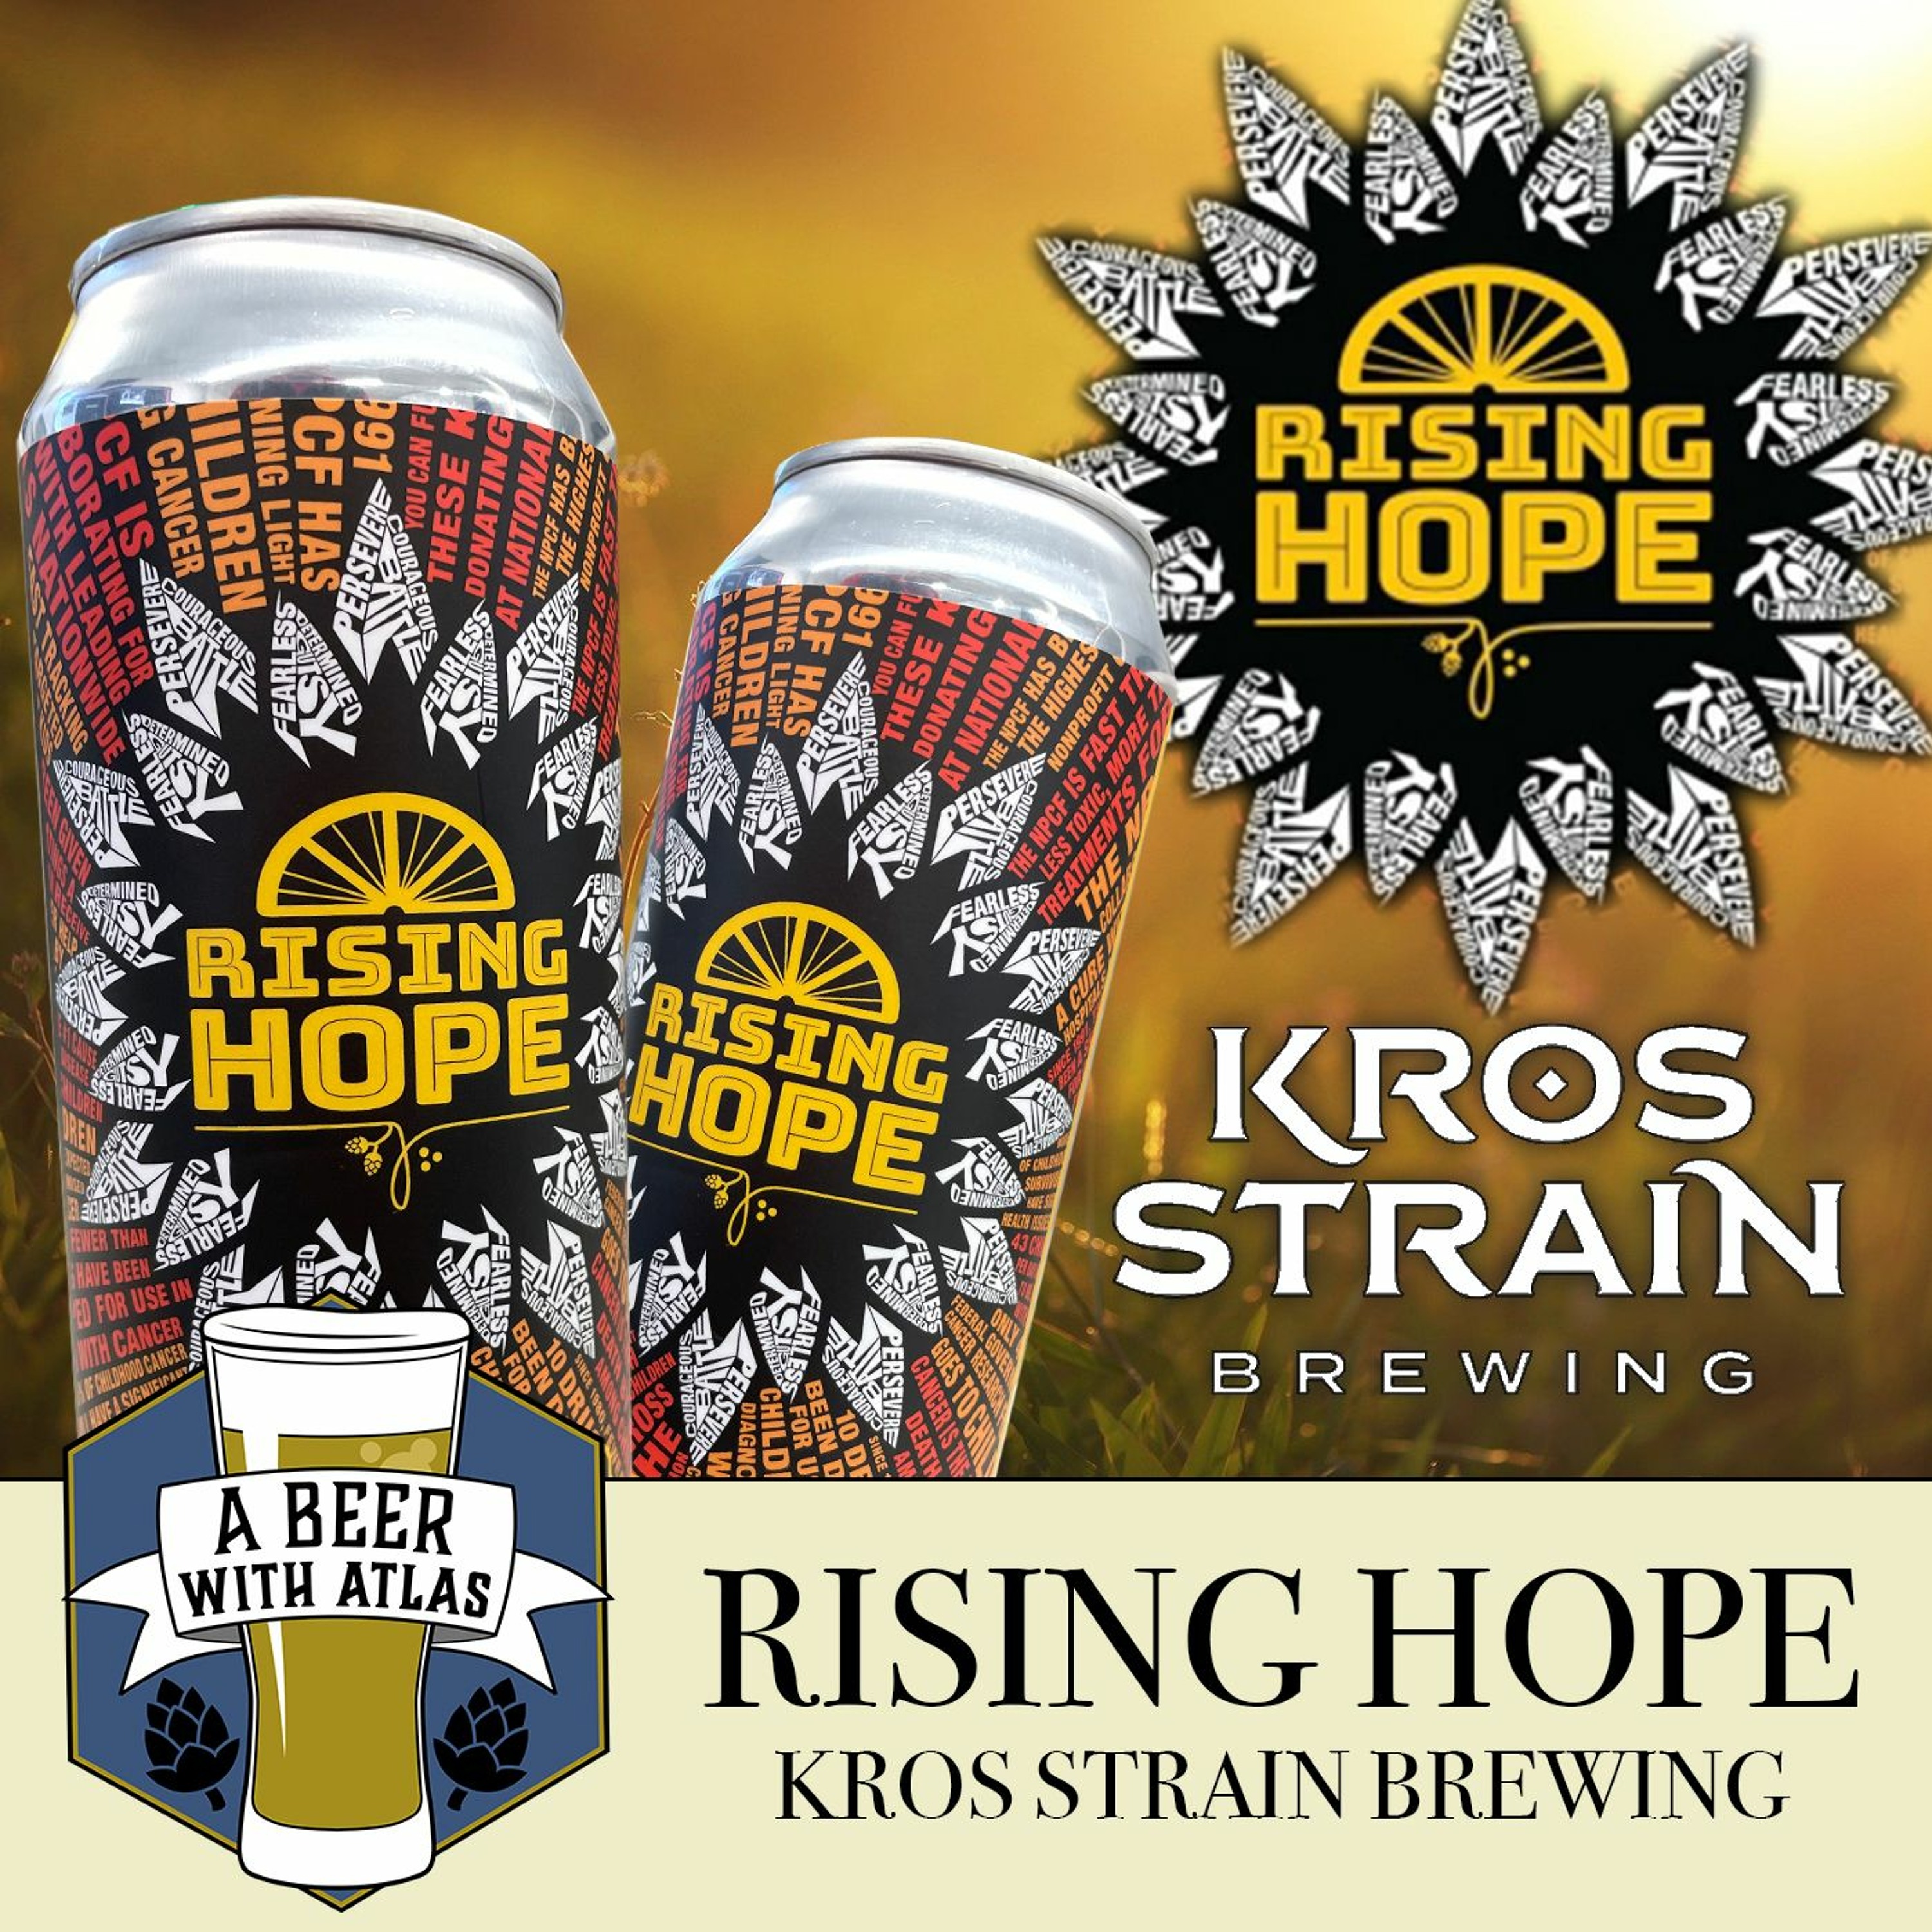 Rising Hope IPA | National Pediatric Cancer Foundation - A Beer with Atlas 169